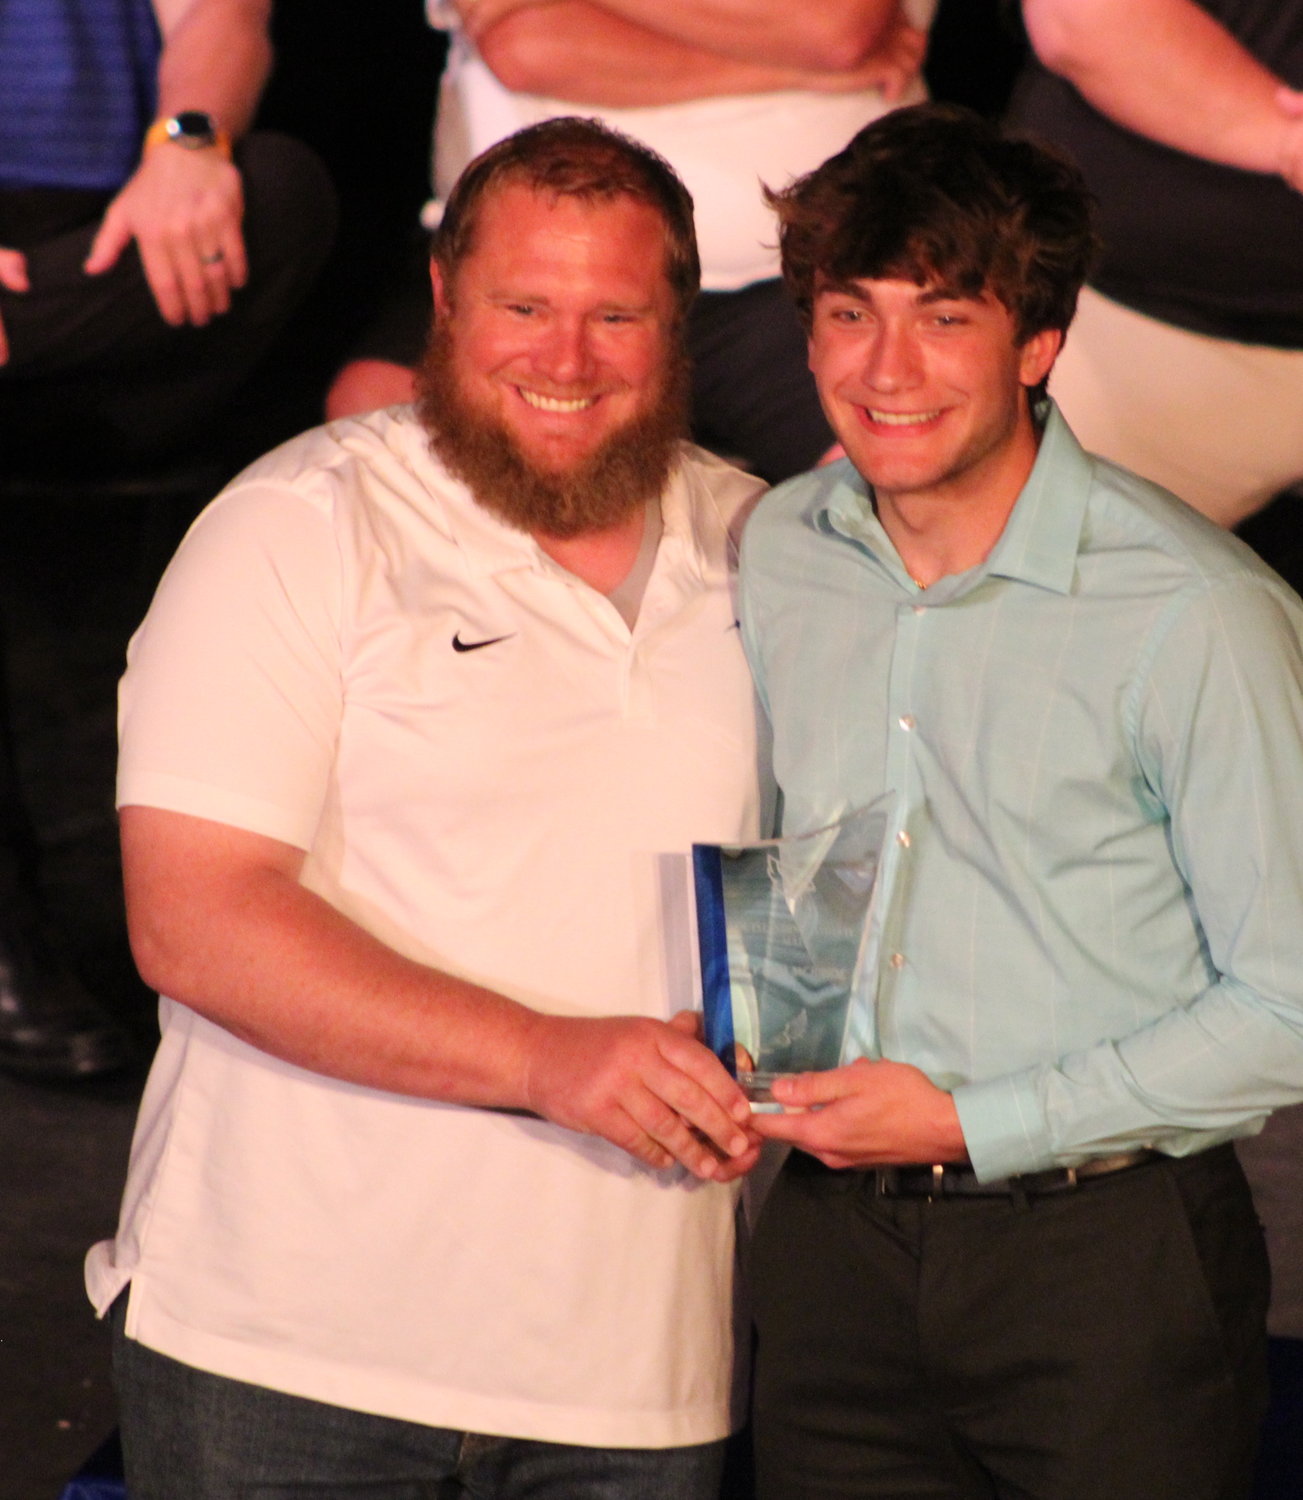 (Left to right) Roy Kaderly and Outstanding Athlete recipient Peyton McBride.